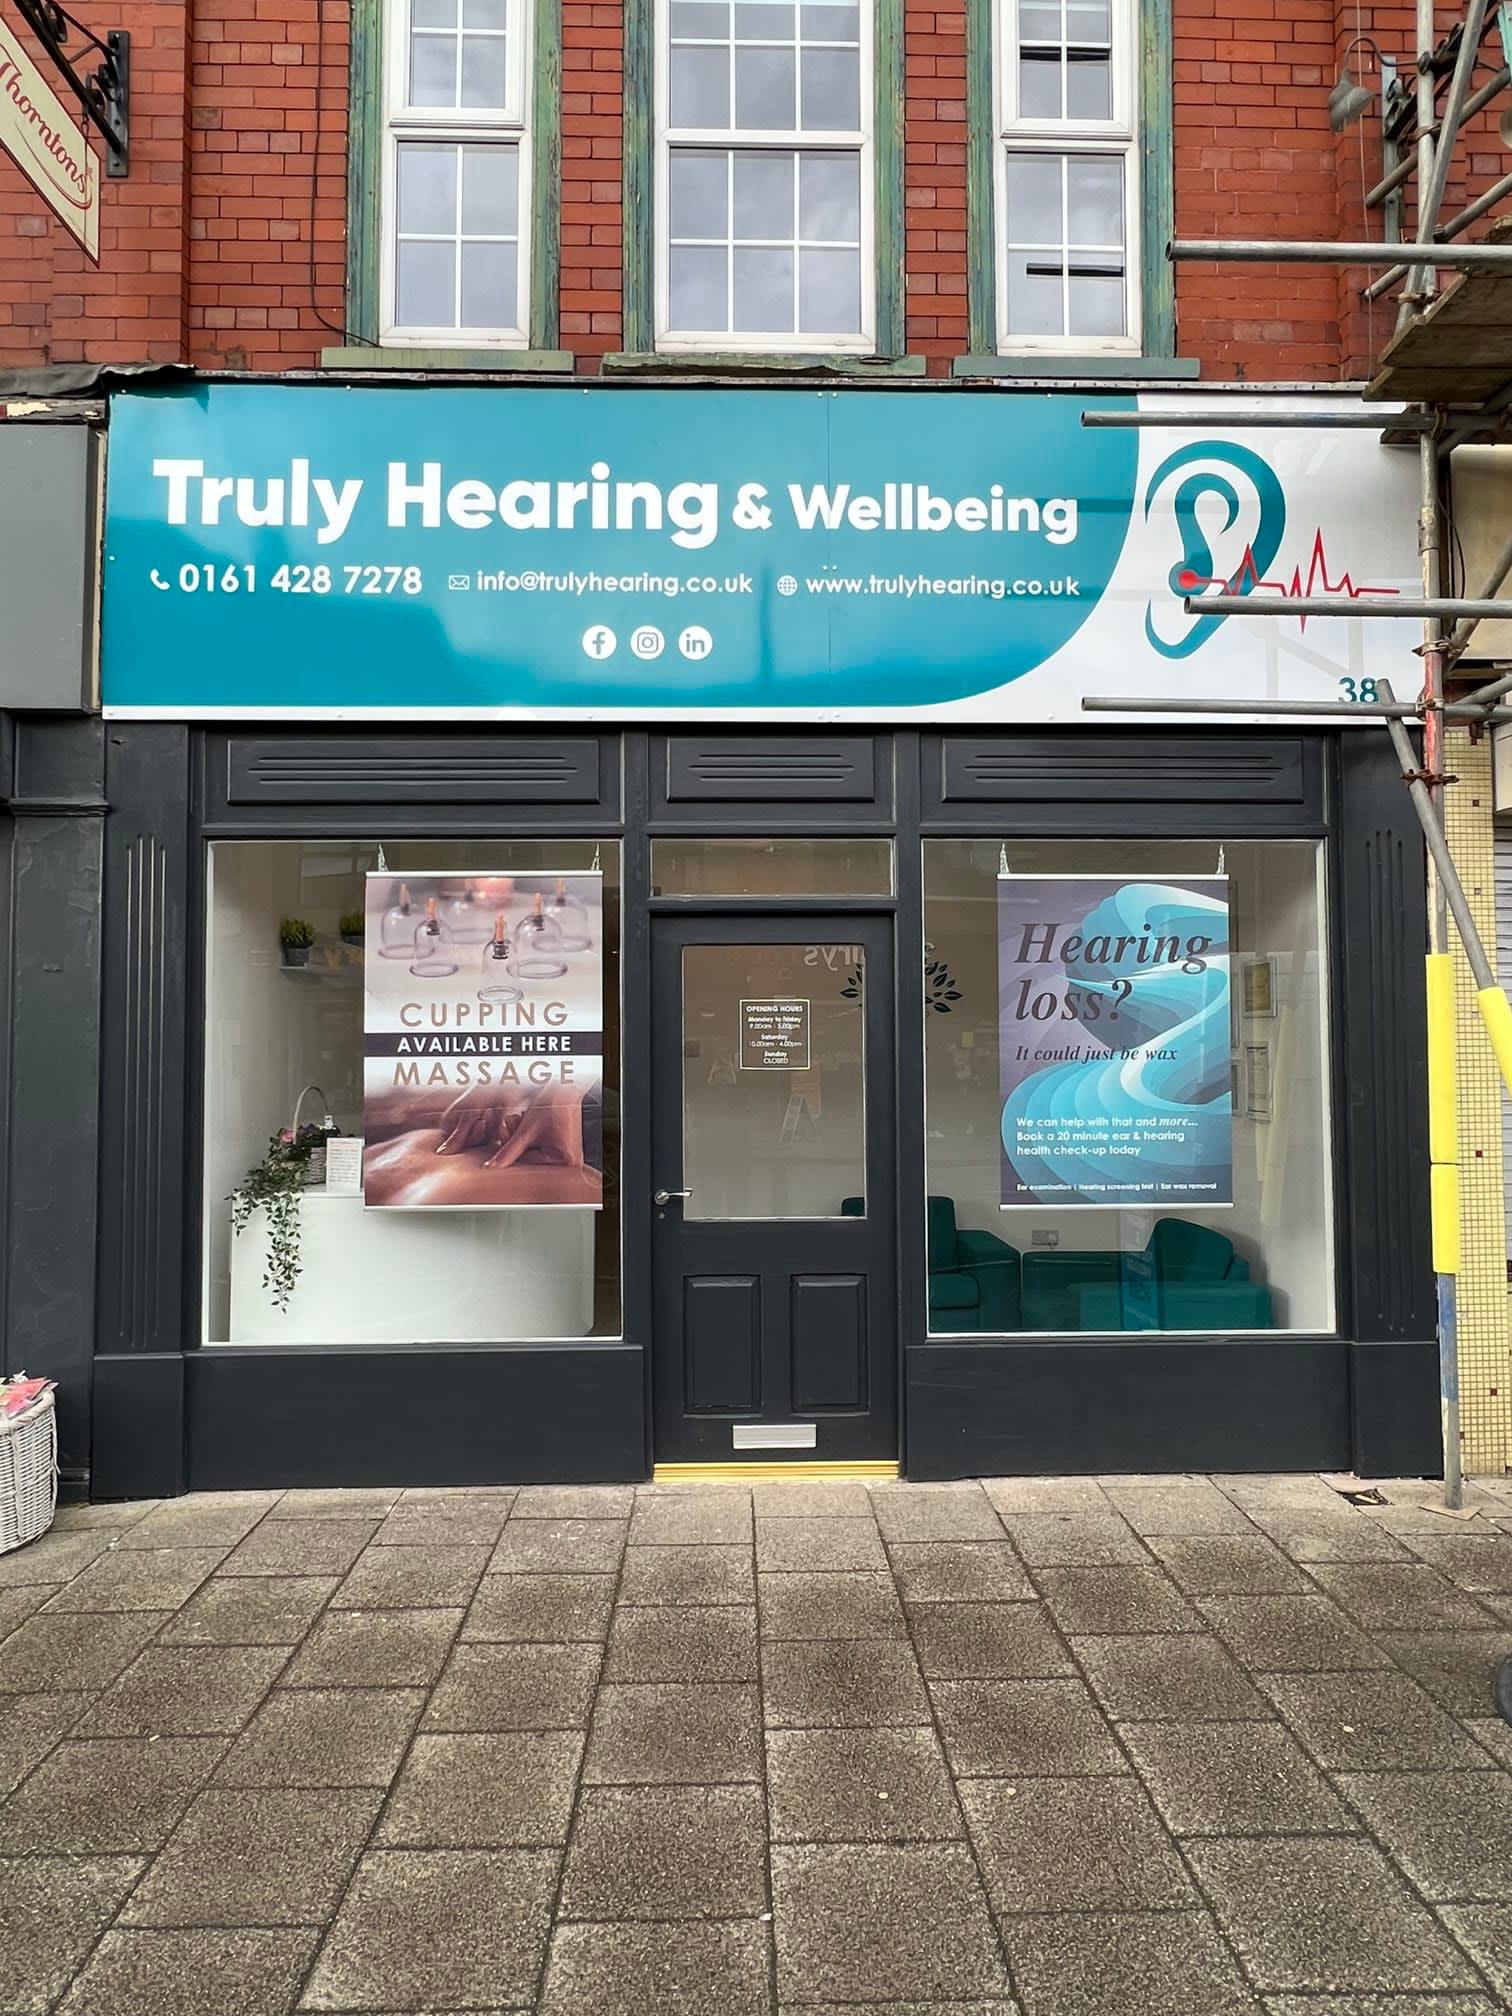 Images Truly Hearing & Wellbeing